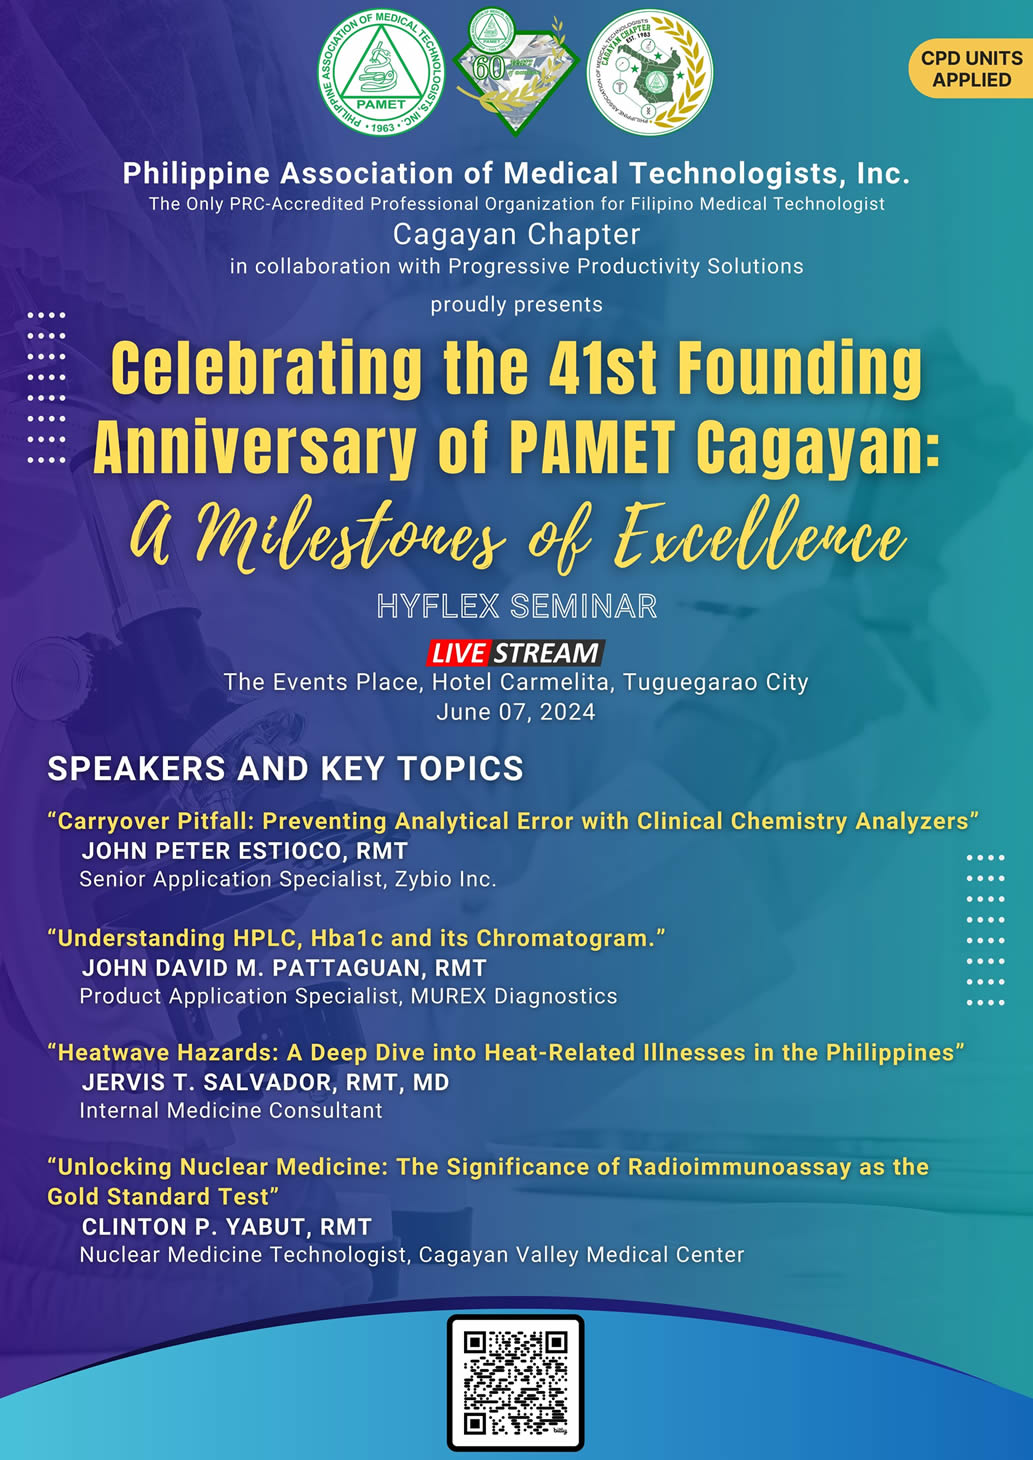 Celebrating the 41st Founding Anniversary of PAMET Cagayan: A Milestones of Excellence